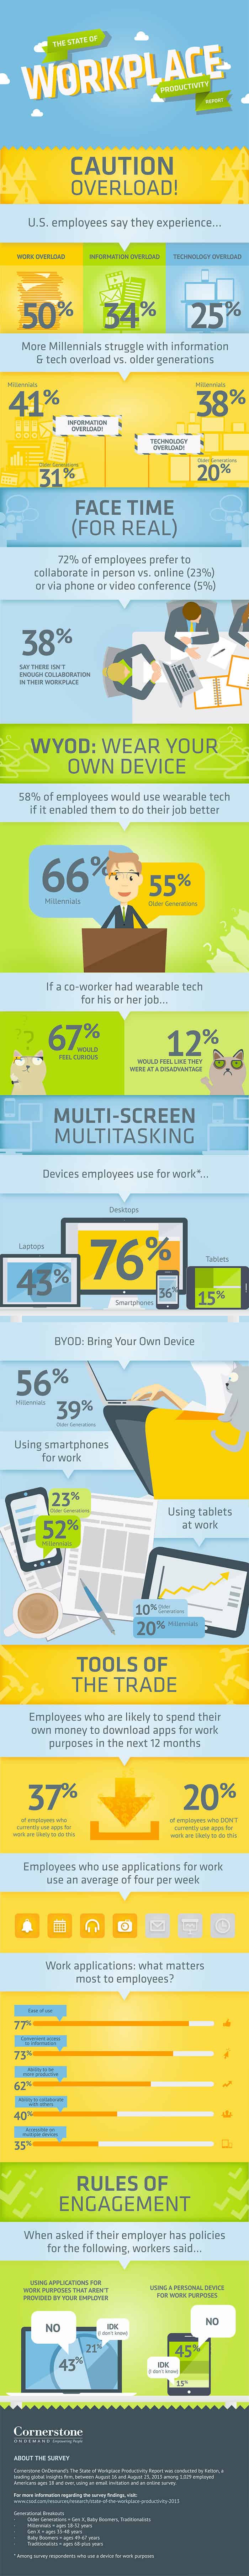 csod-infographic-state-of-workplace-2013